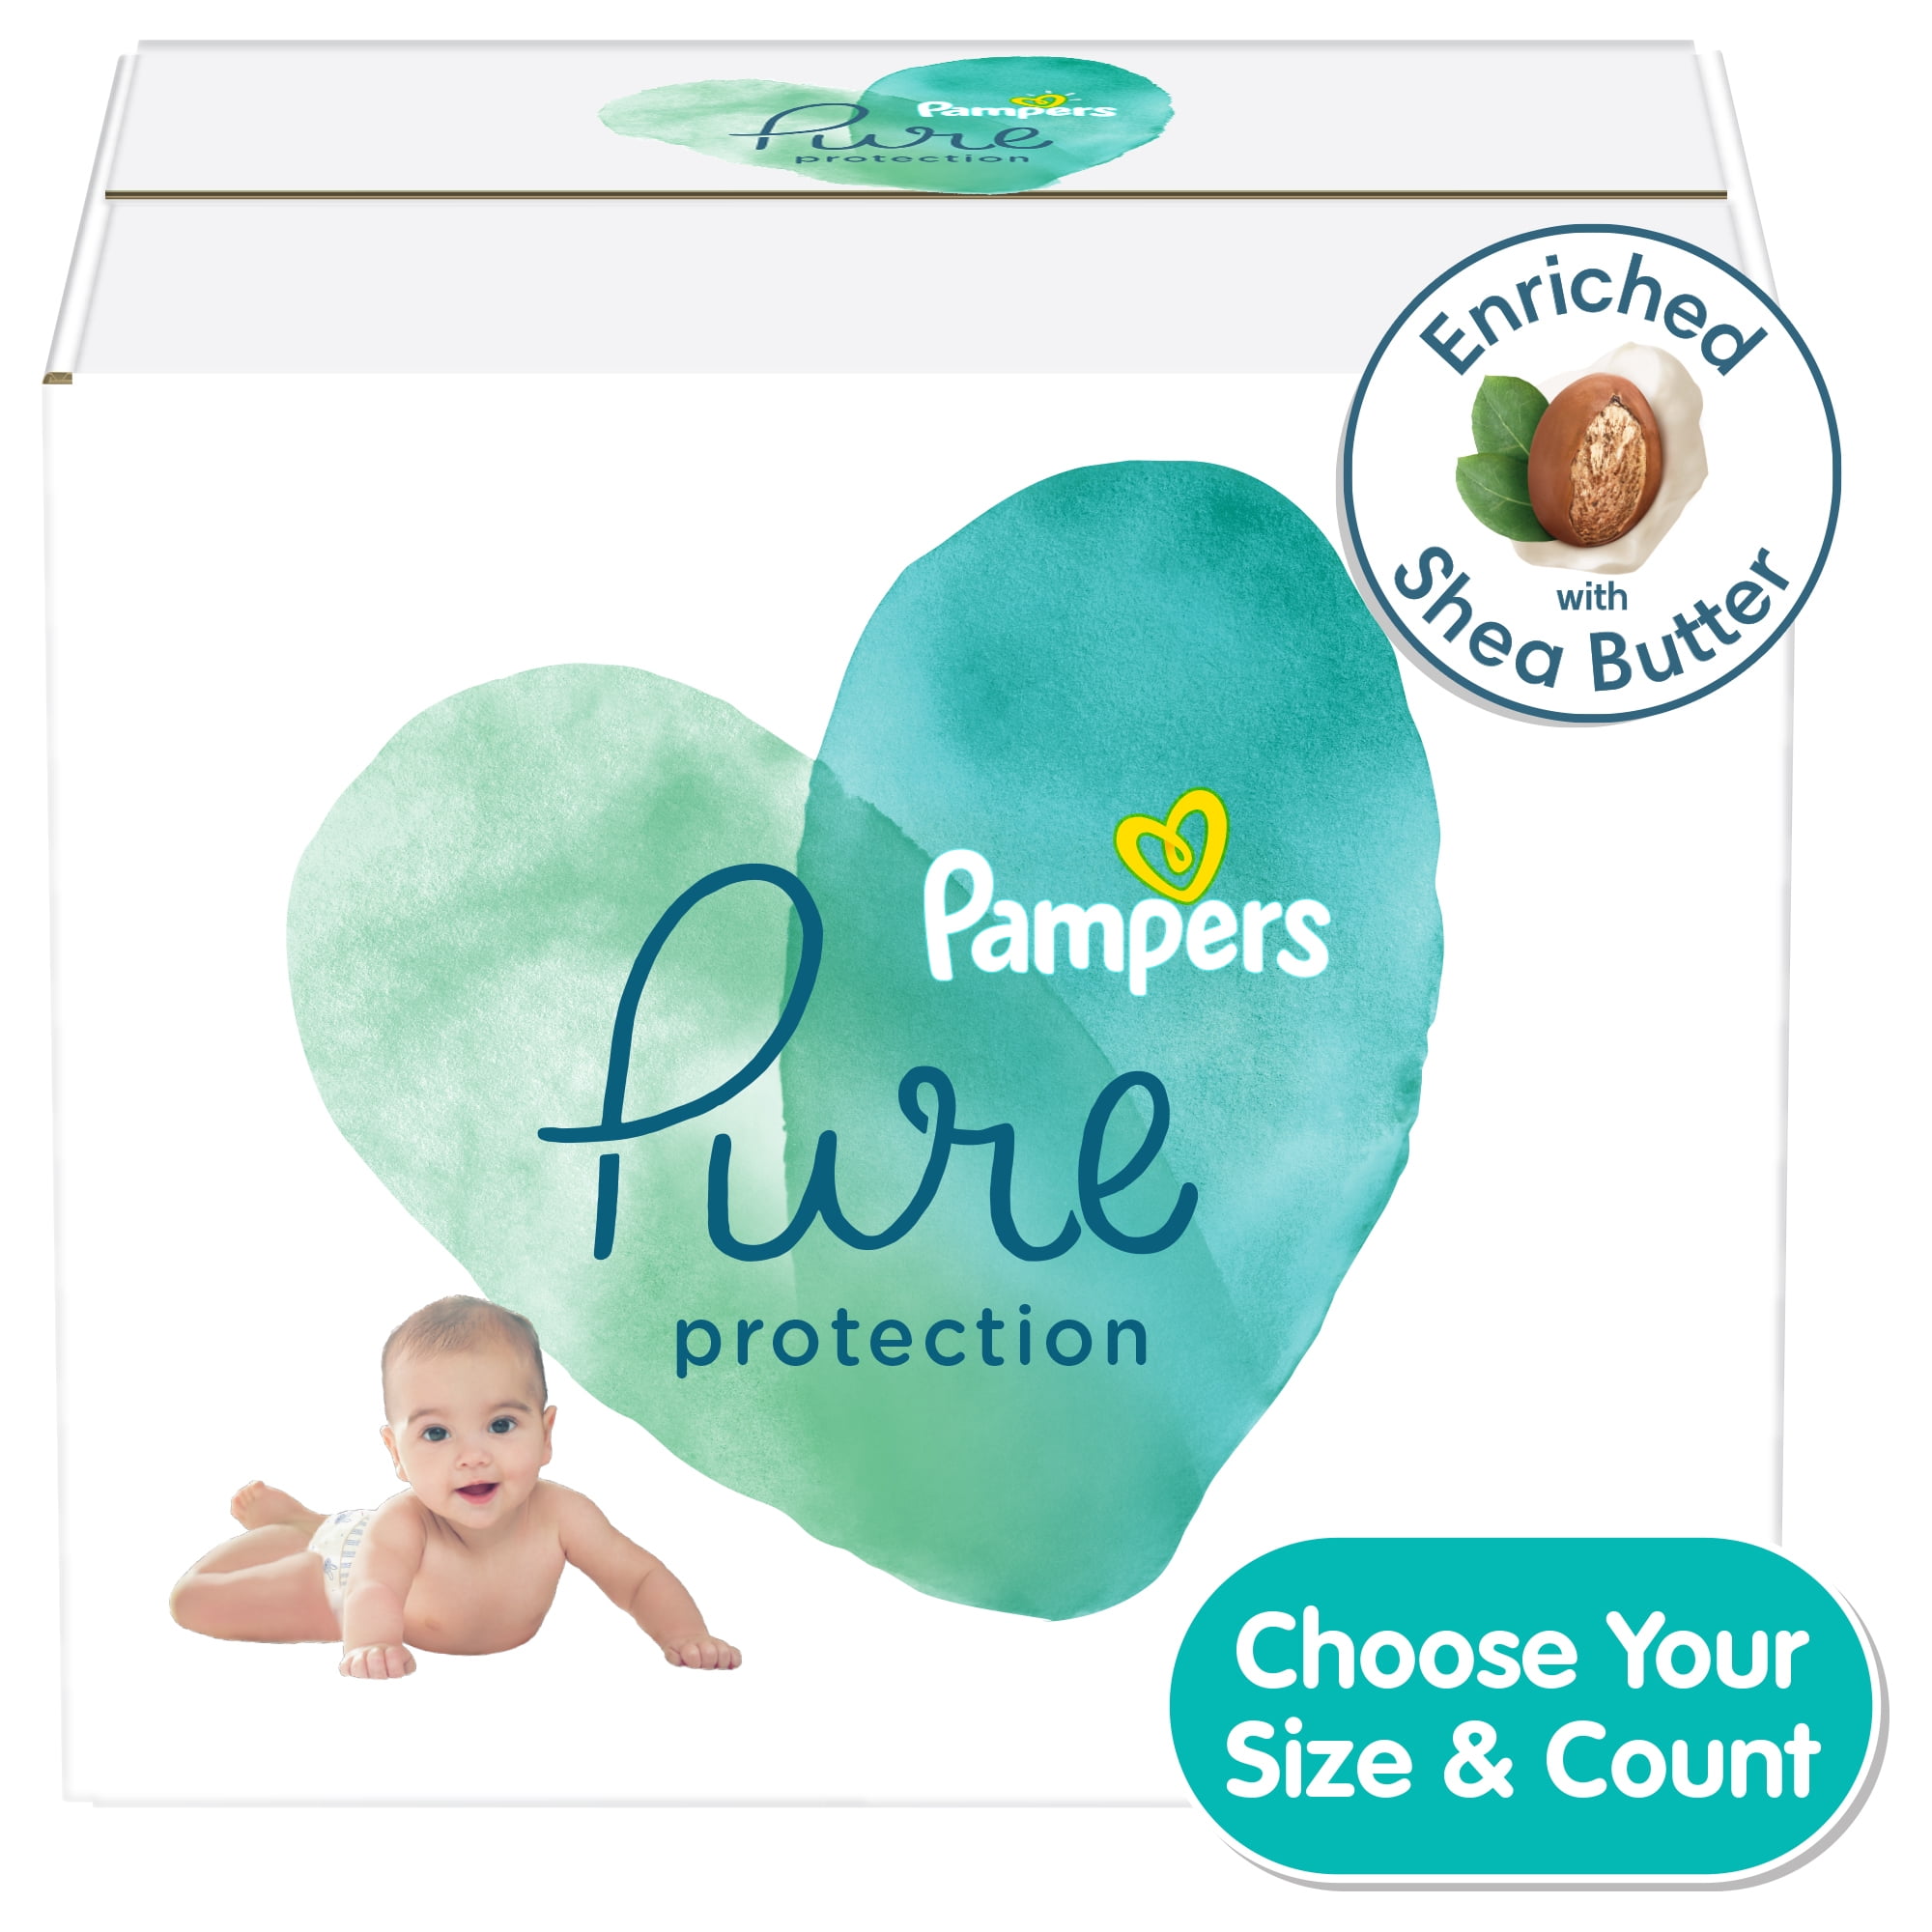 Realistisch Surichinmoi Site lijn Pampers Pure Diapers Size 3, 66 Count (Select for More Options) -  Walmart.com